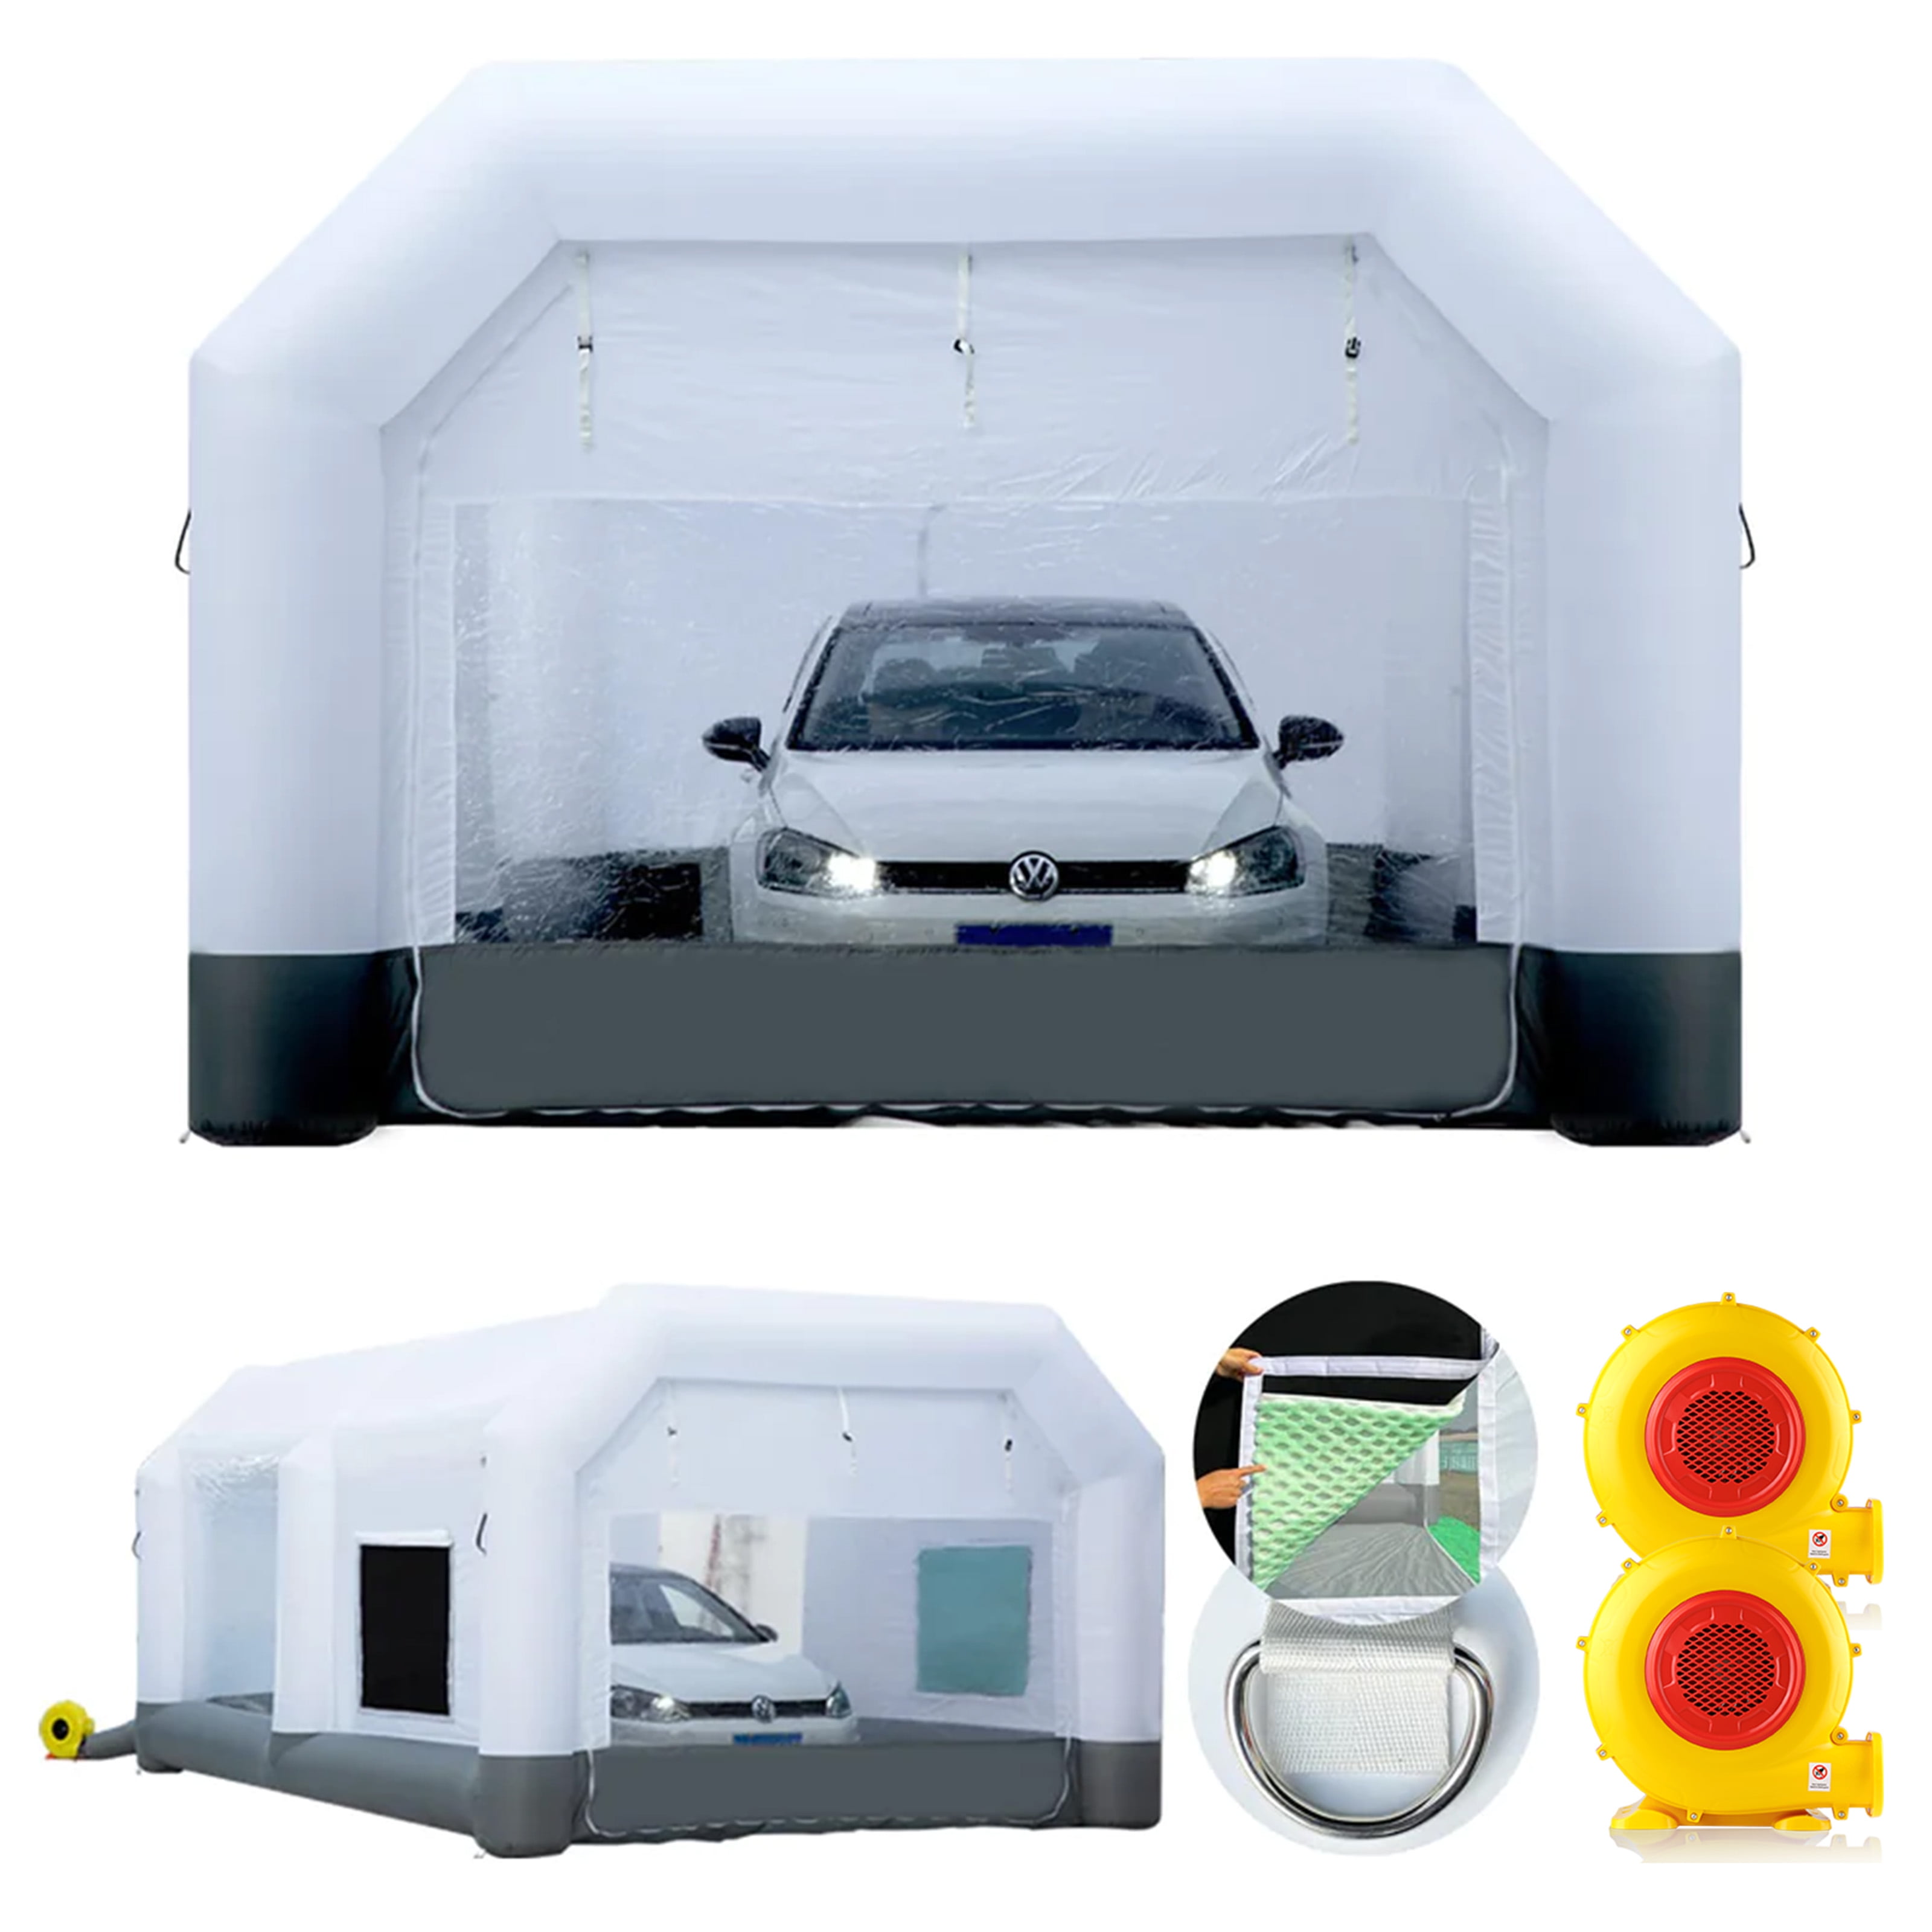 GORILLASPRO Inflatable Paint Booth 33X20X15Ft with 2 Blowers (750W+1100W) Large Inflatable Spray Booth More Durable,Perfect for SUV & Semi-trunk